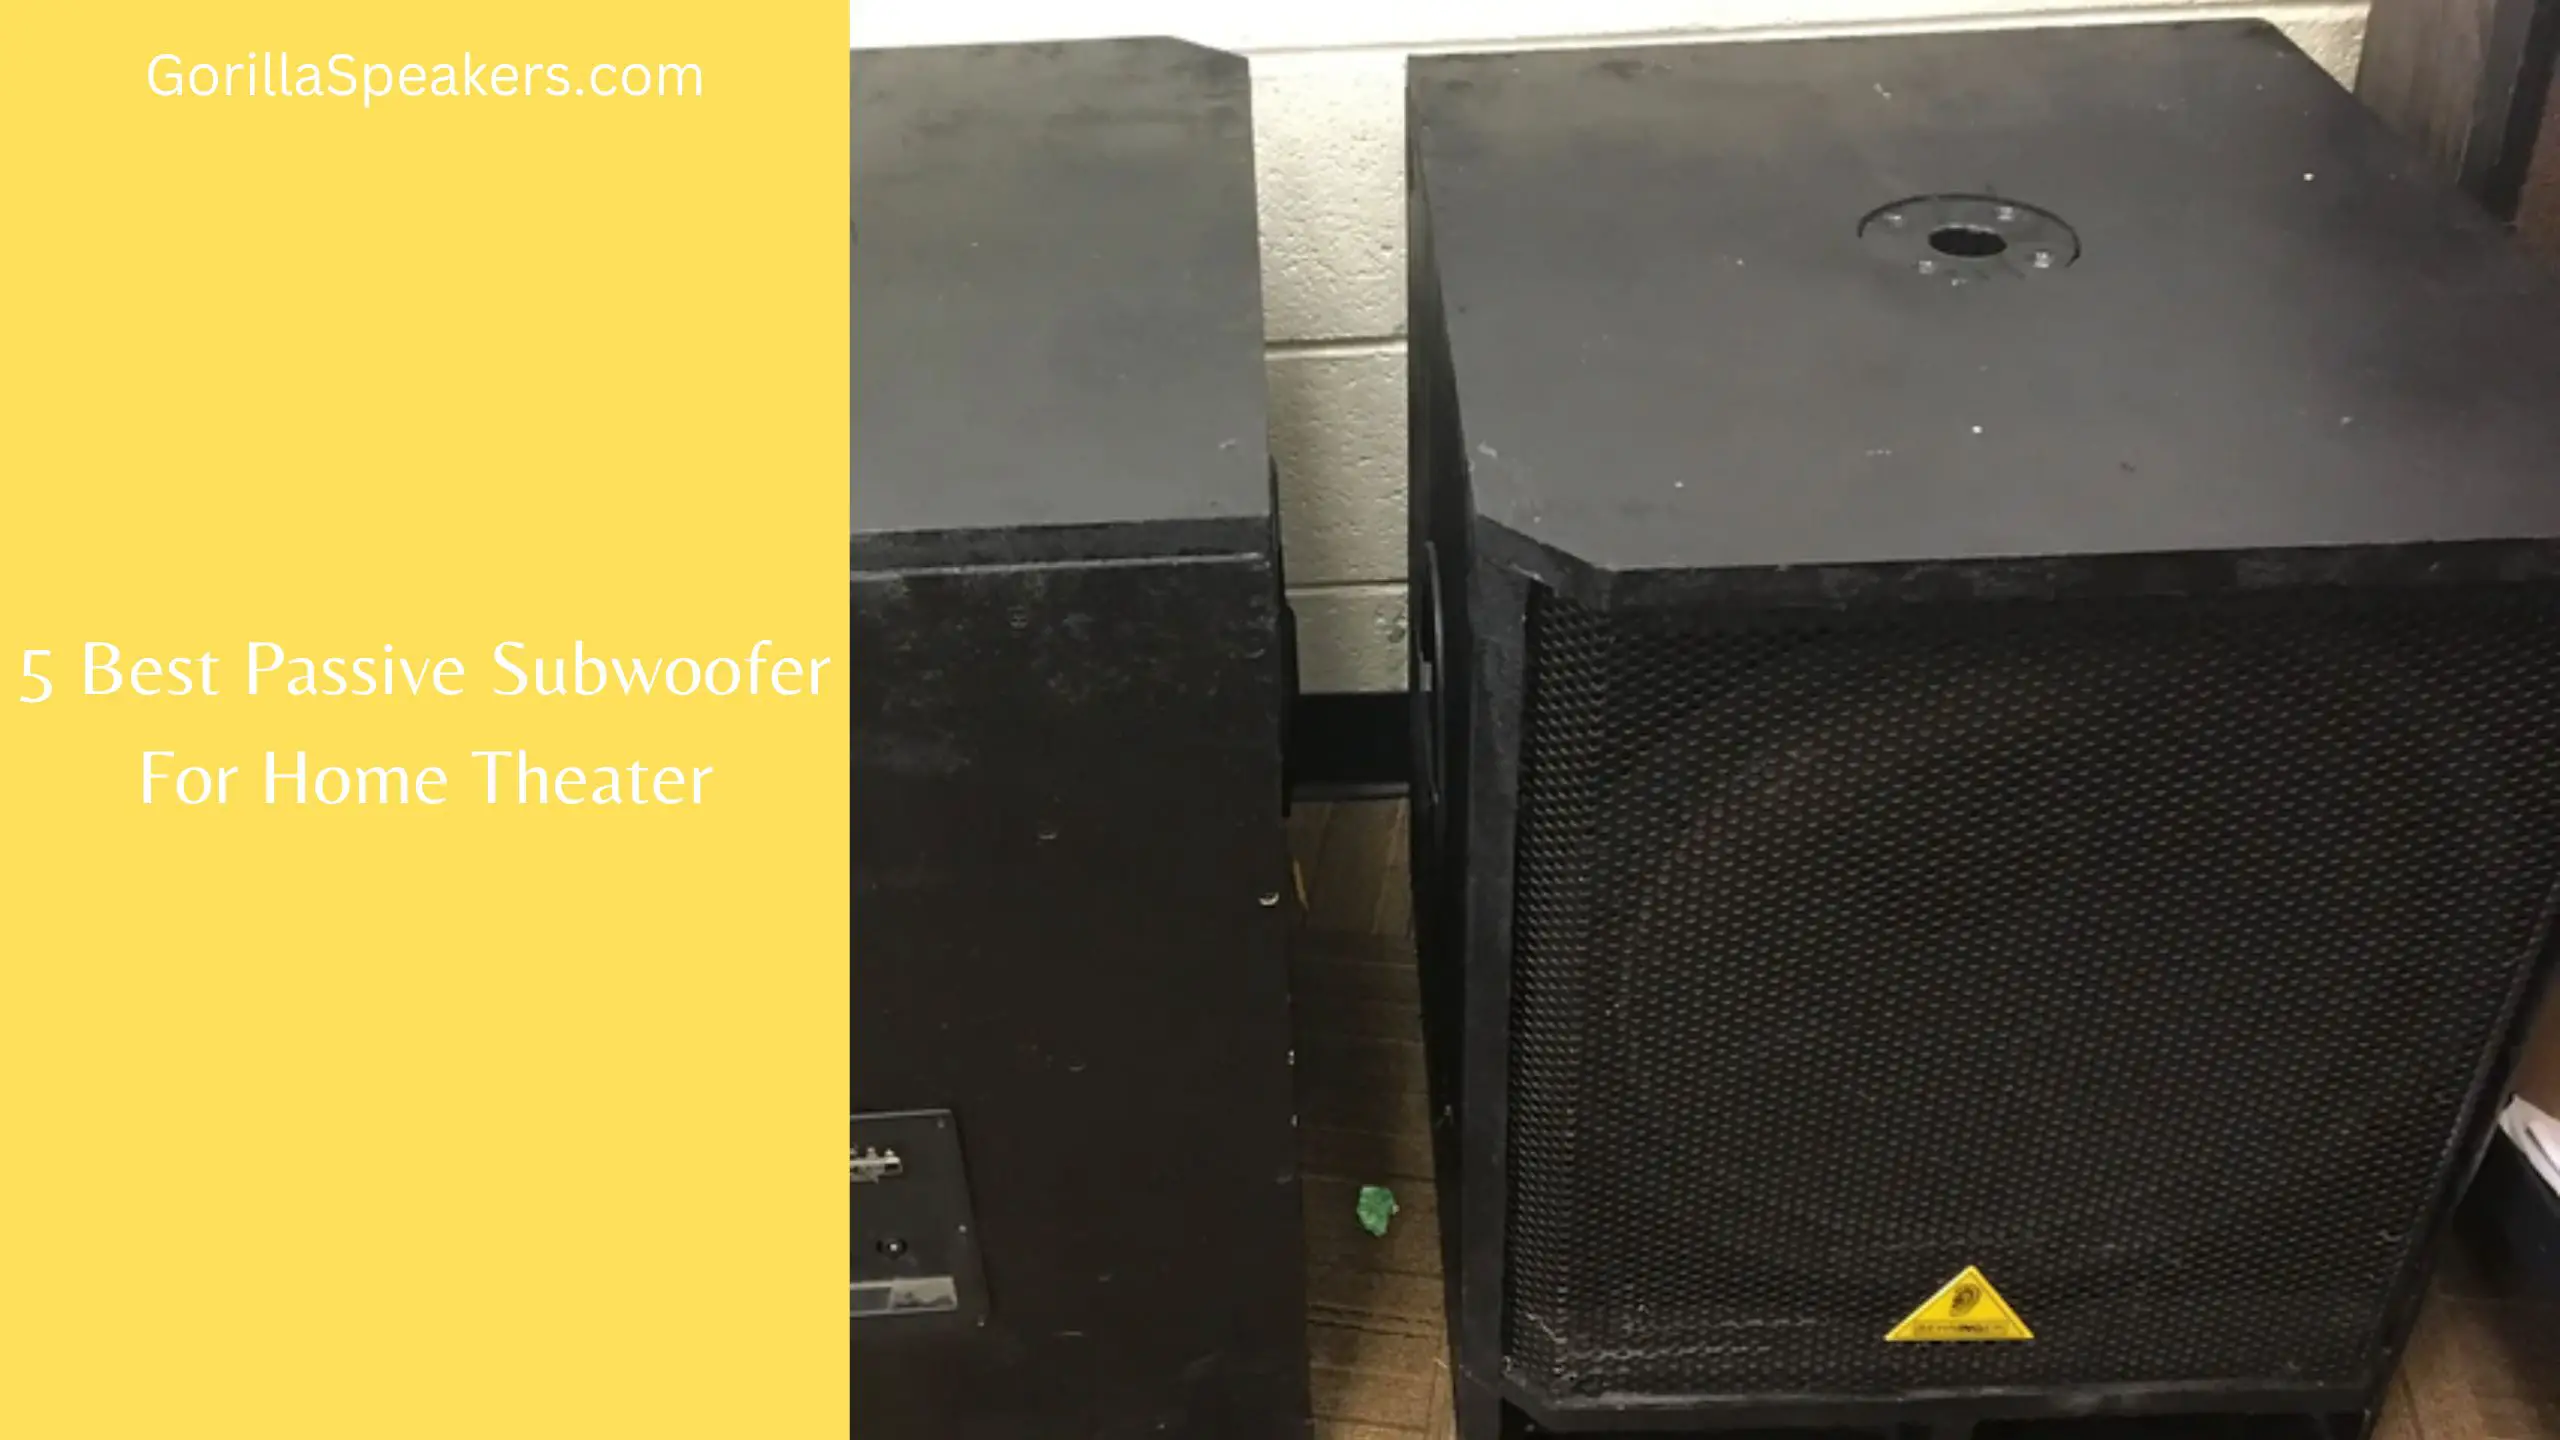 5 Best Passive Subwoofer For Home Theater